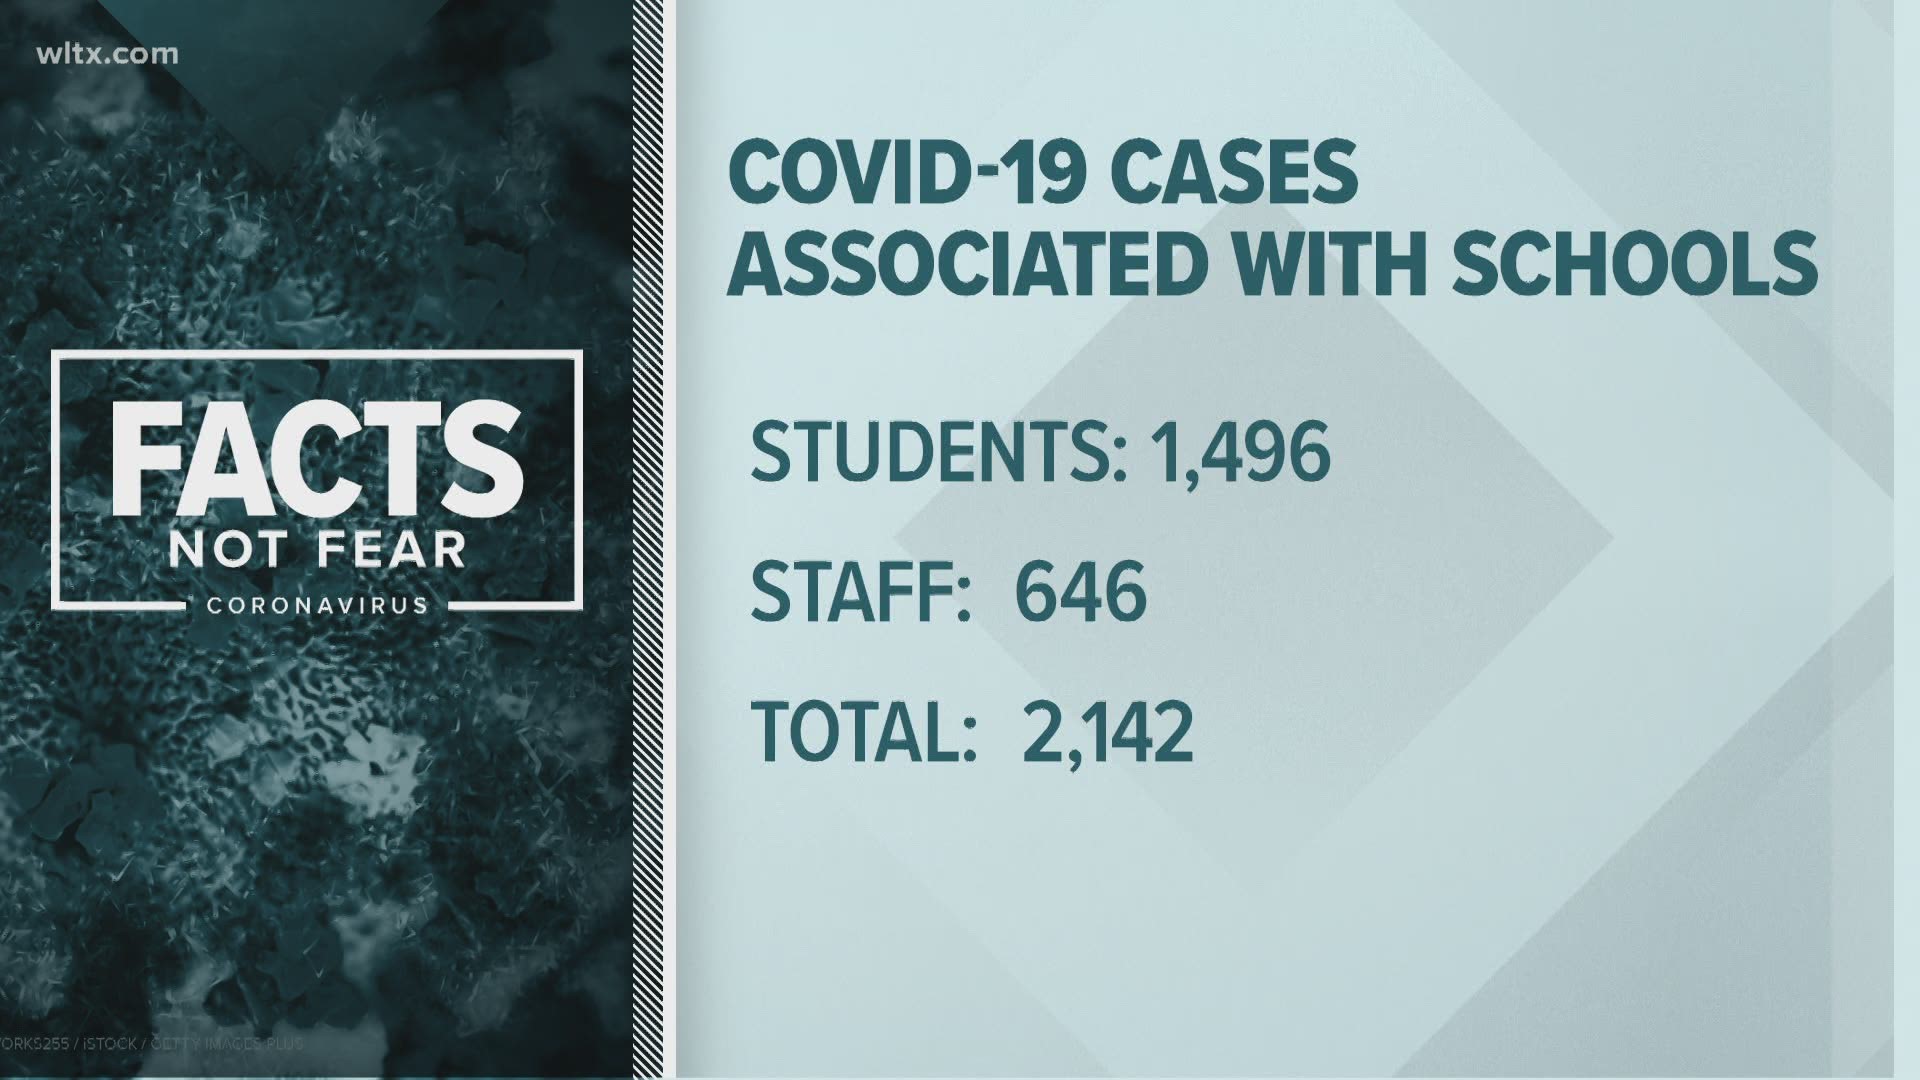 The total number of cases associated with schools is 2,142. 1,496 of those are associated with students